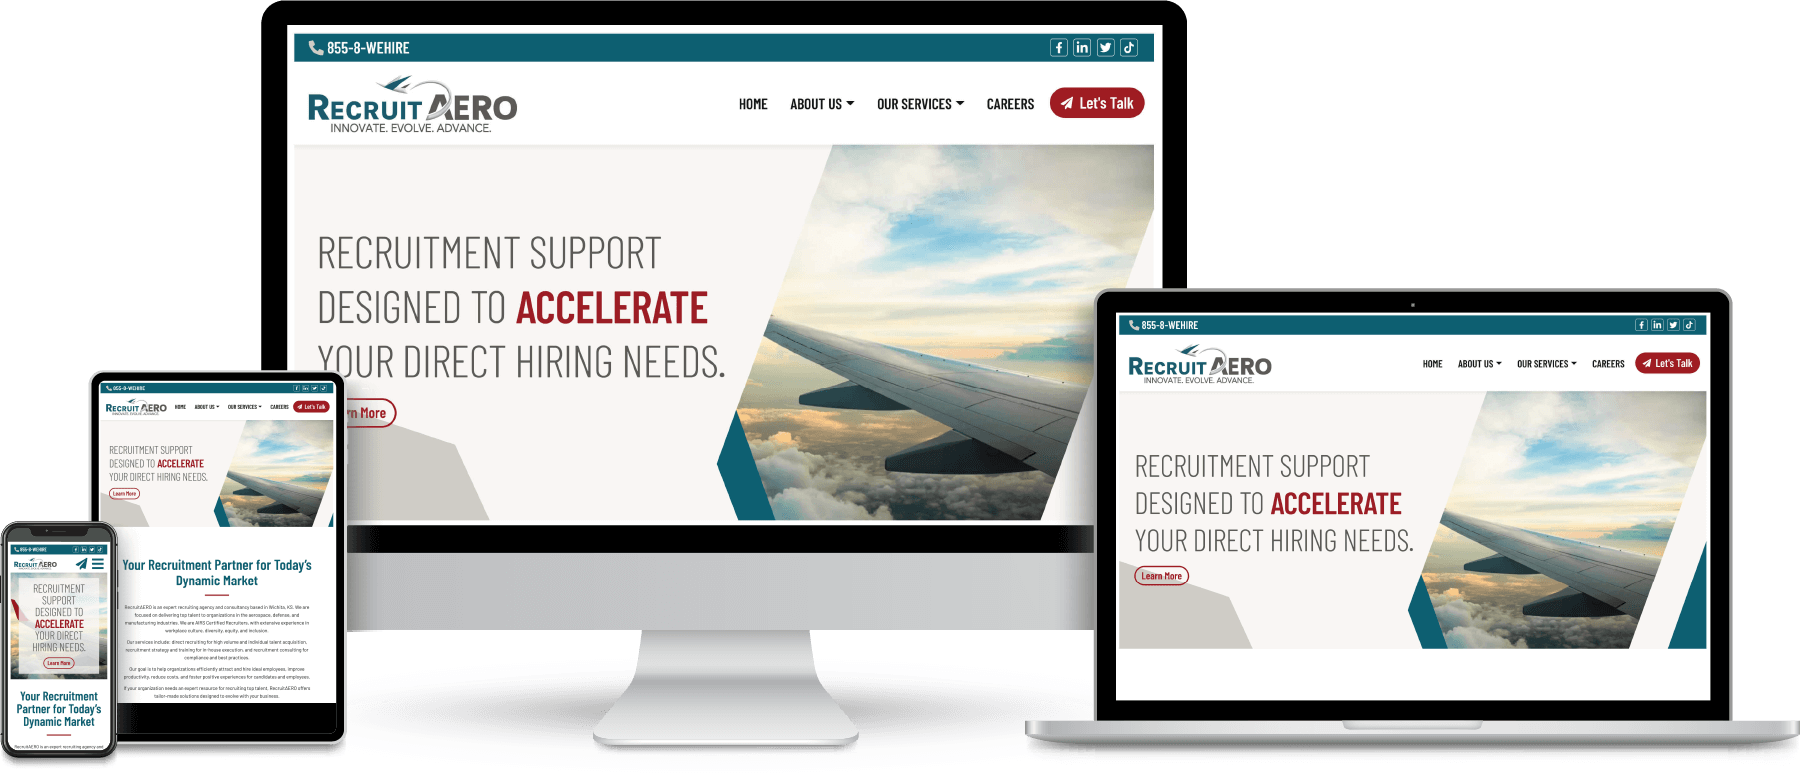 RecruitAERO website shown on desktop, laptop, tablet and mobile devices.